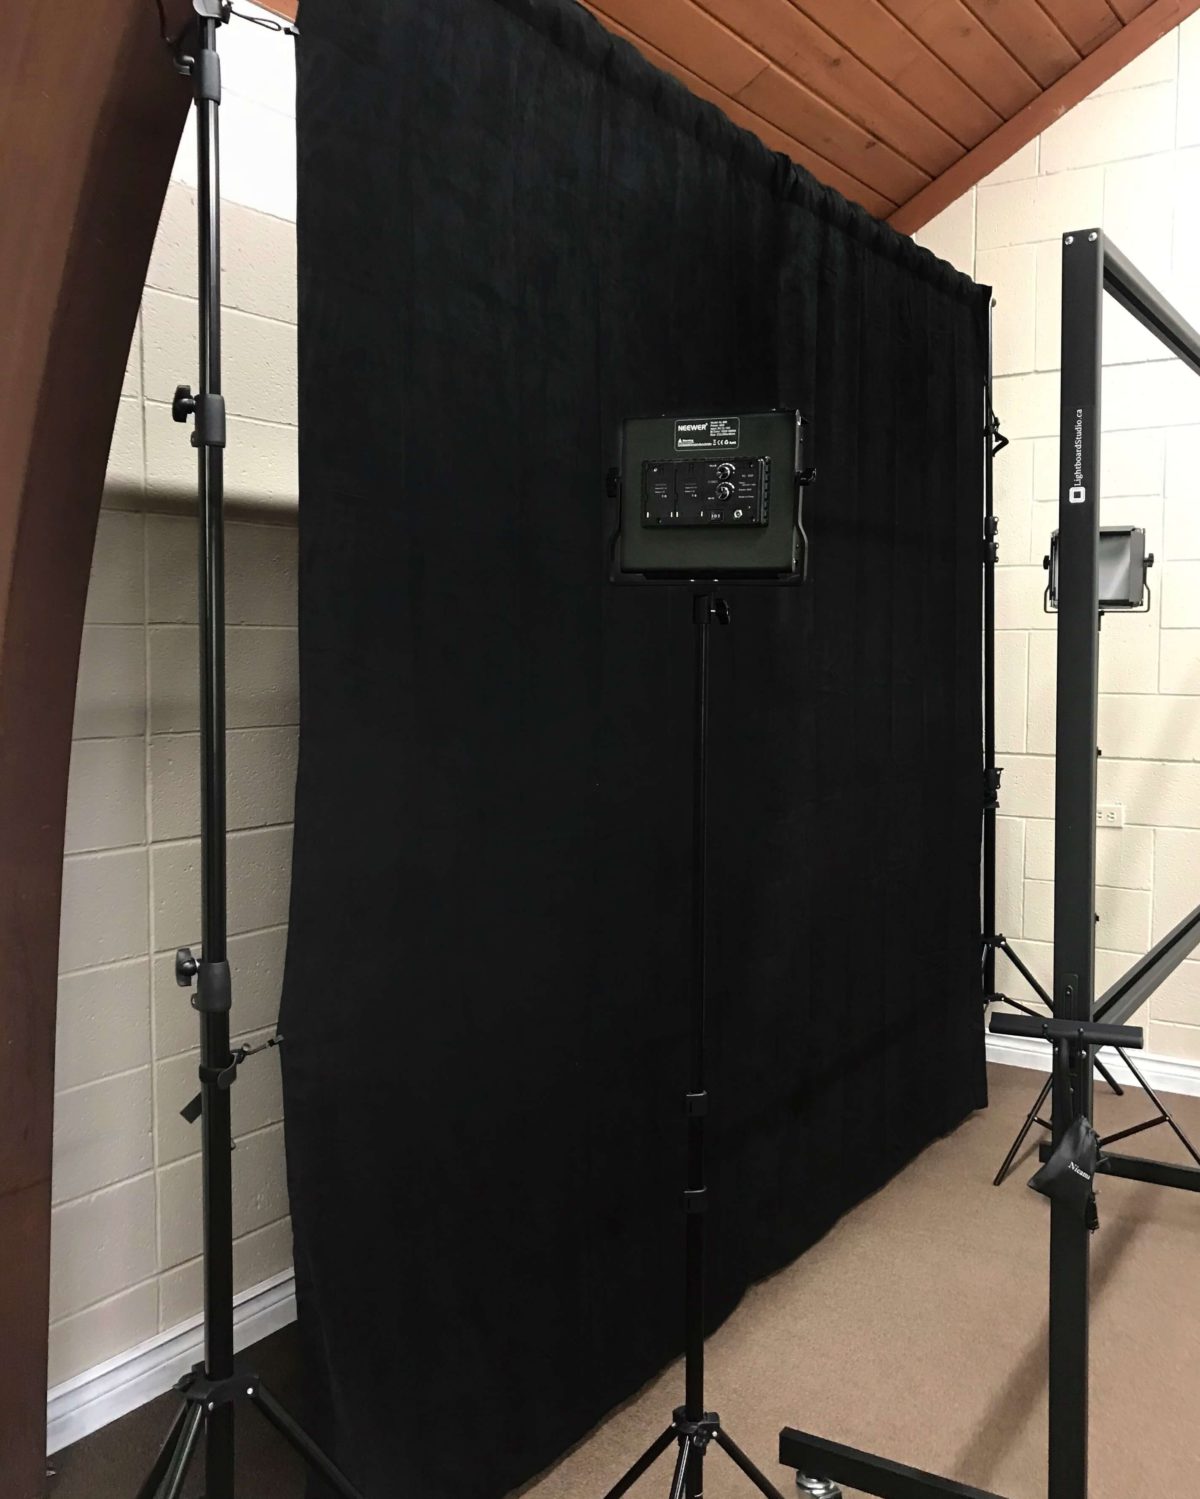 Standalone black backdrop fabric product side view with studio lights and lightboard